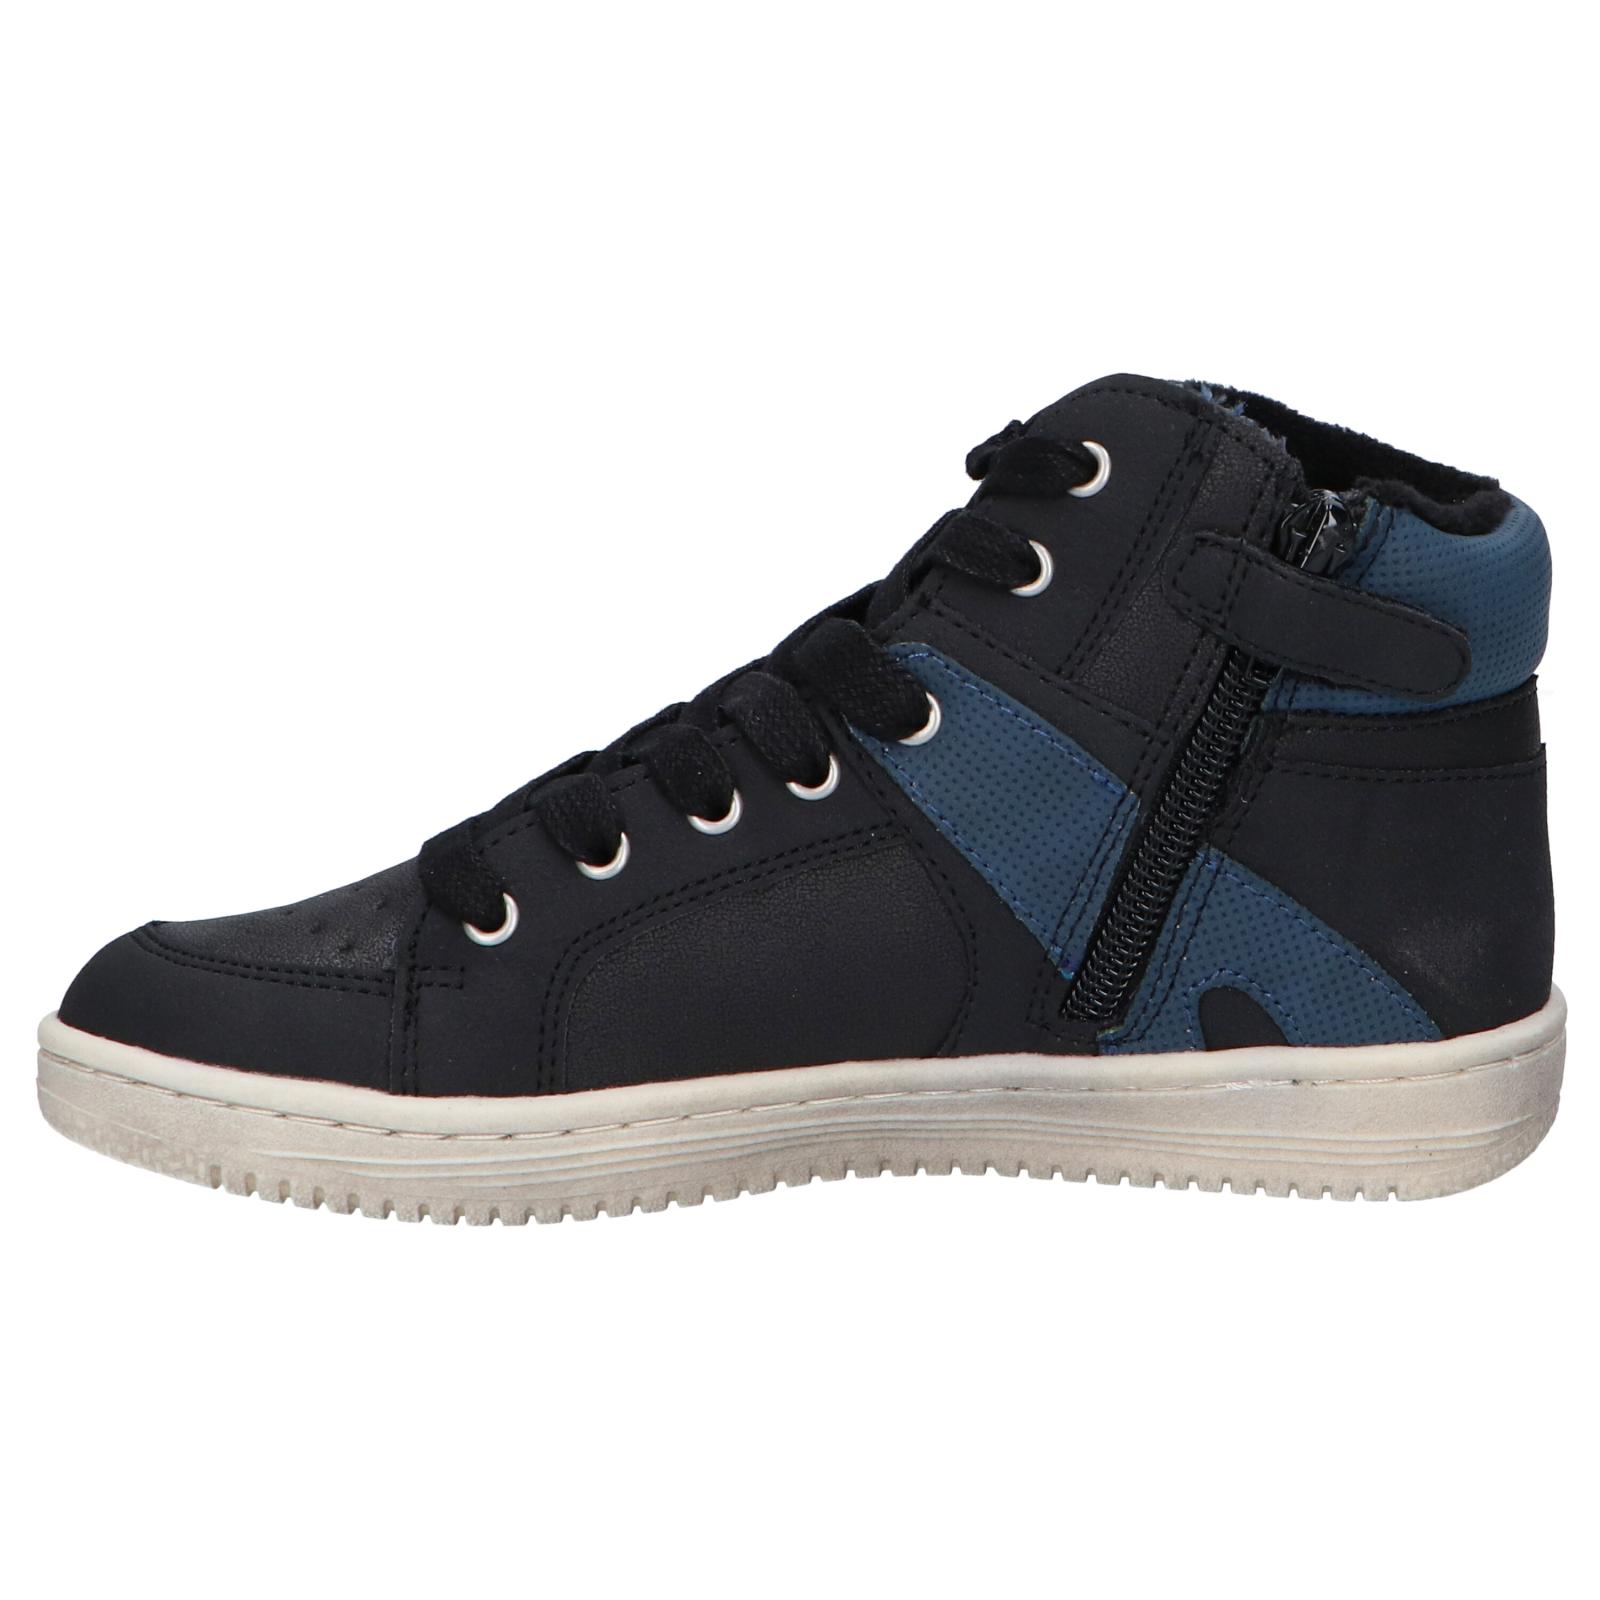 Botines Kickers 739353-30 Lowell Synthetique